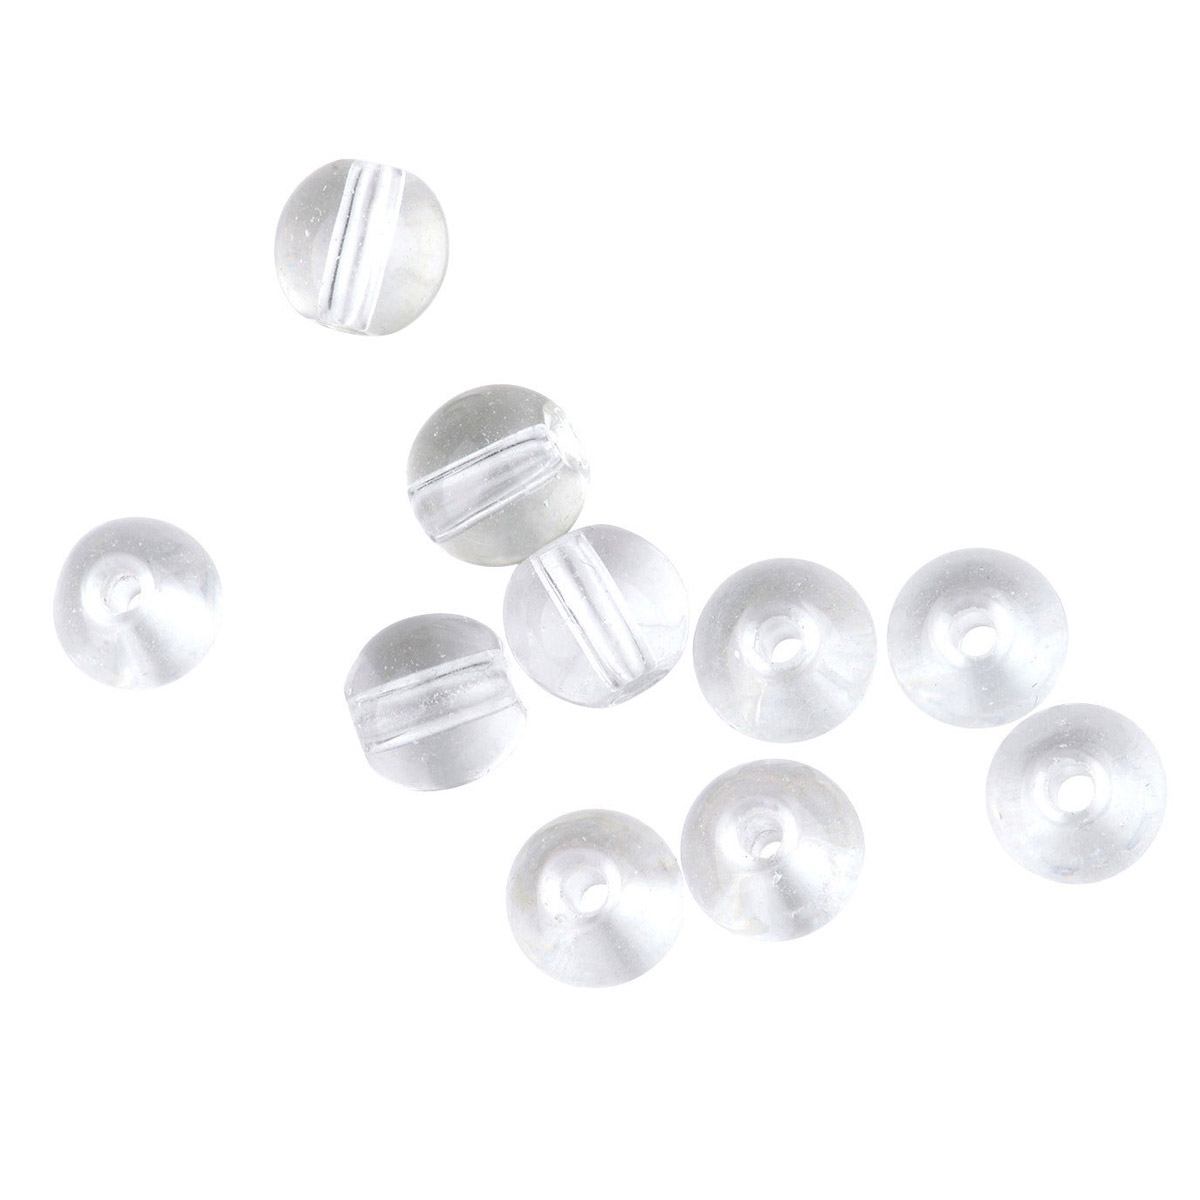 Spro Round Smooth Glass Beads Clear Diamond -  4.0 mm -  6.0 mm -  8.0 mm